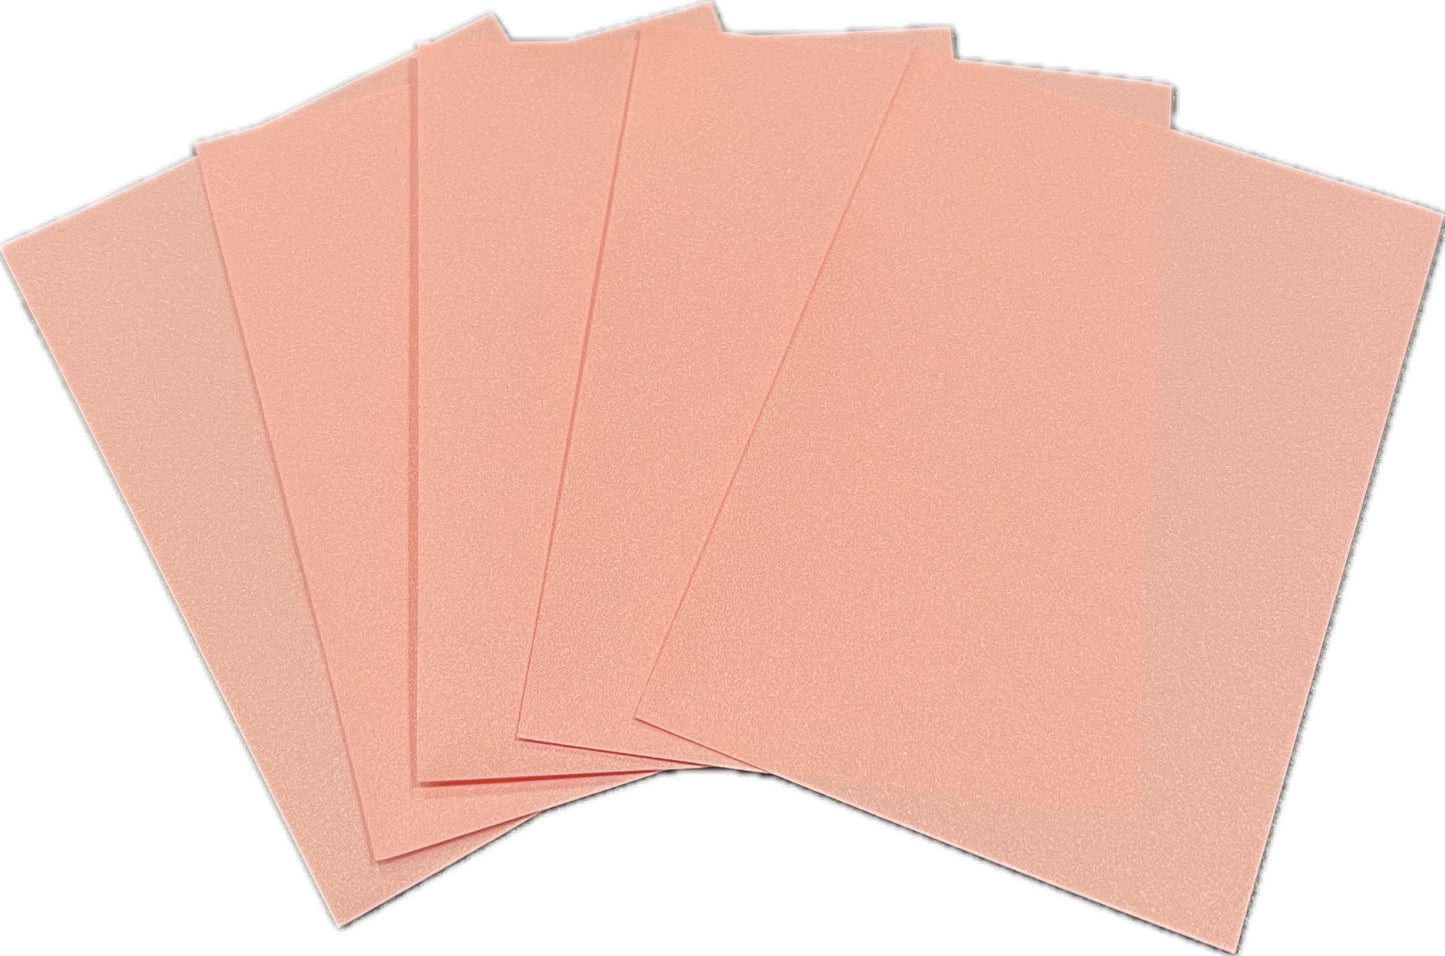 Standard Size Card Sleeves - Pink - 200 Count - 66 x 91mm